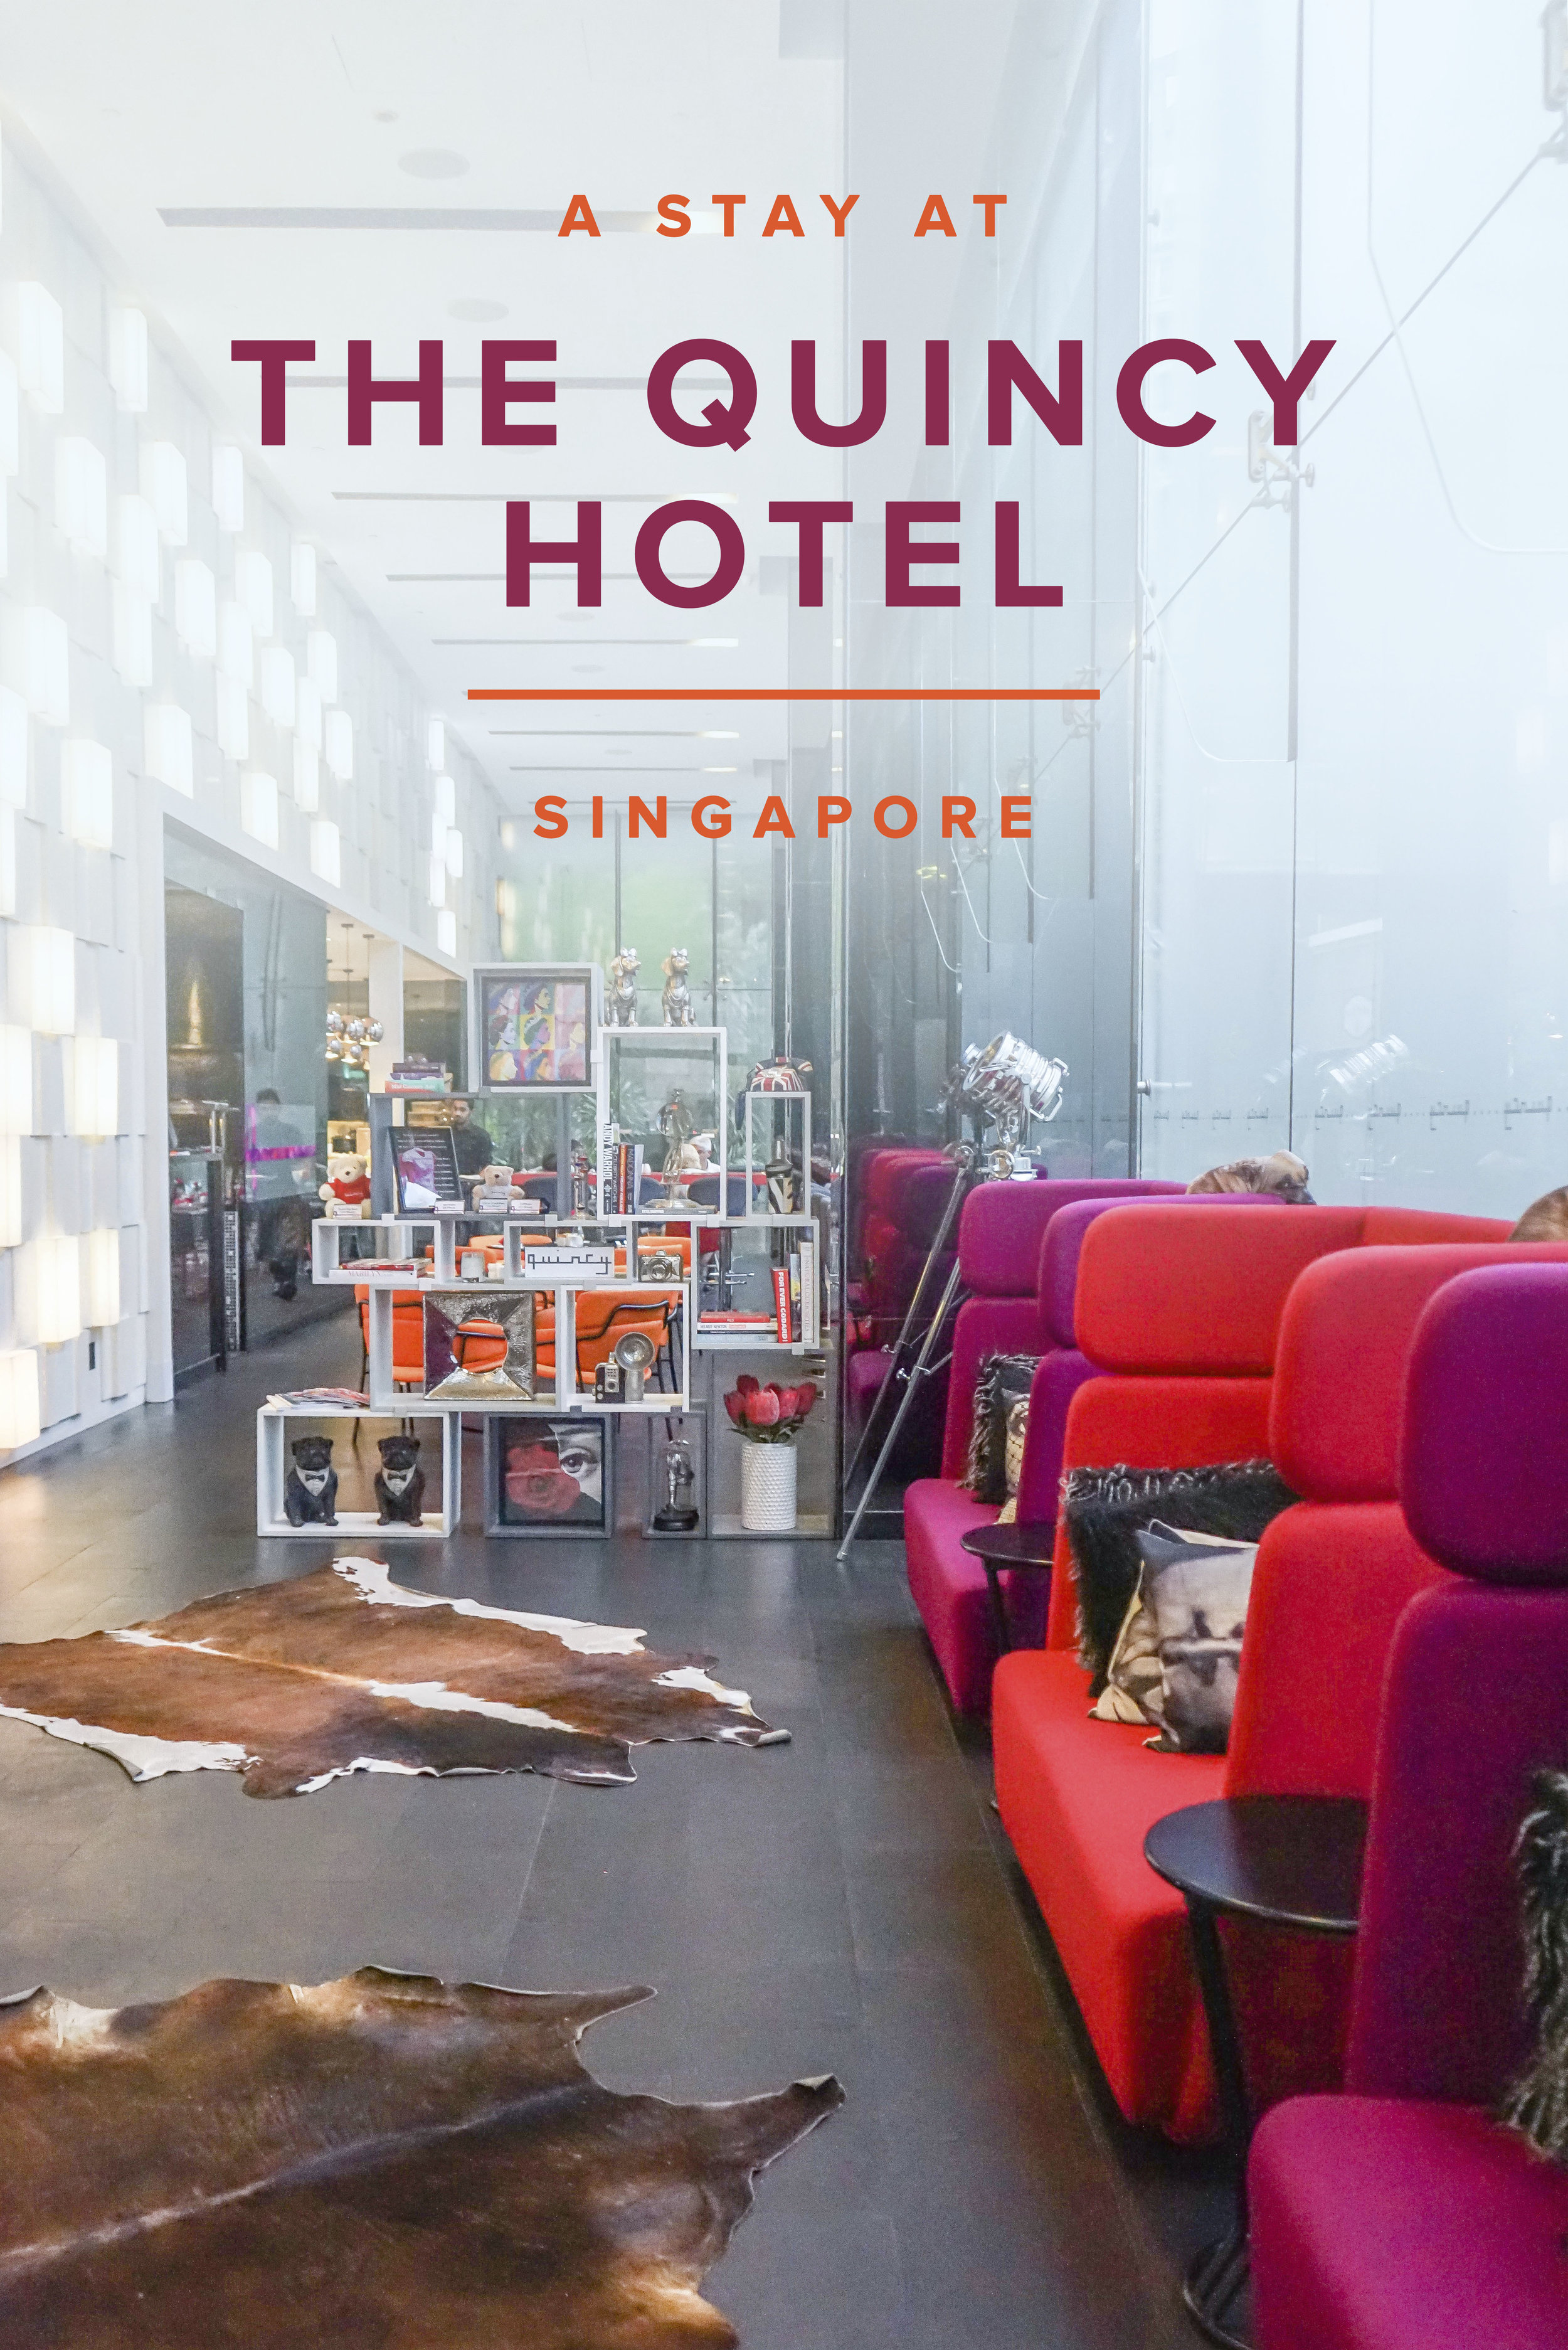 The Quincy Hotel, Singapore, Asia